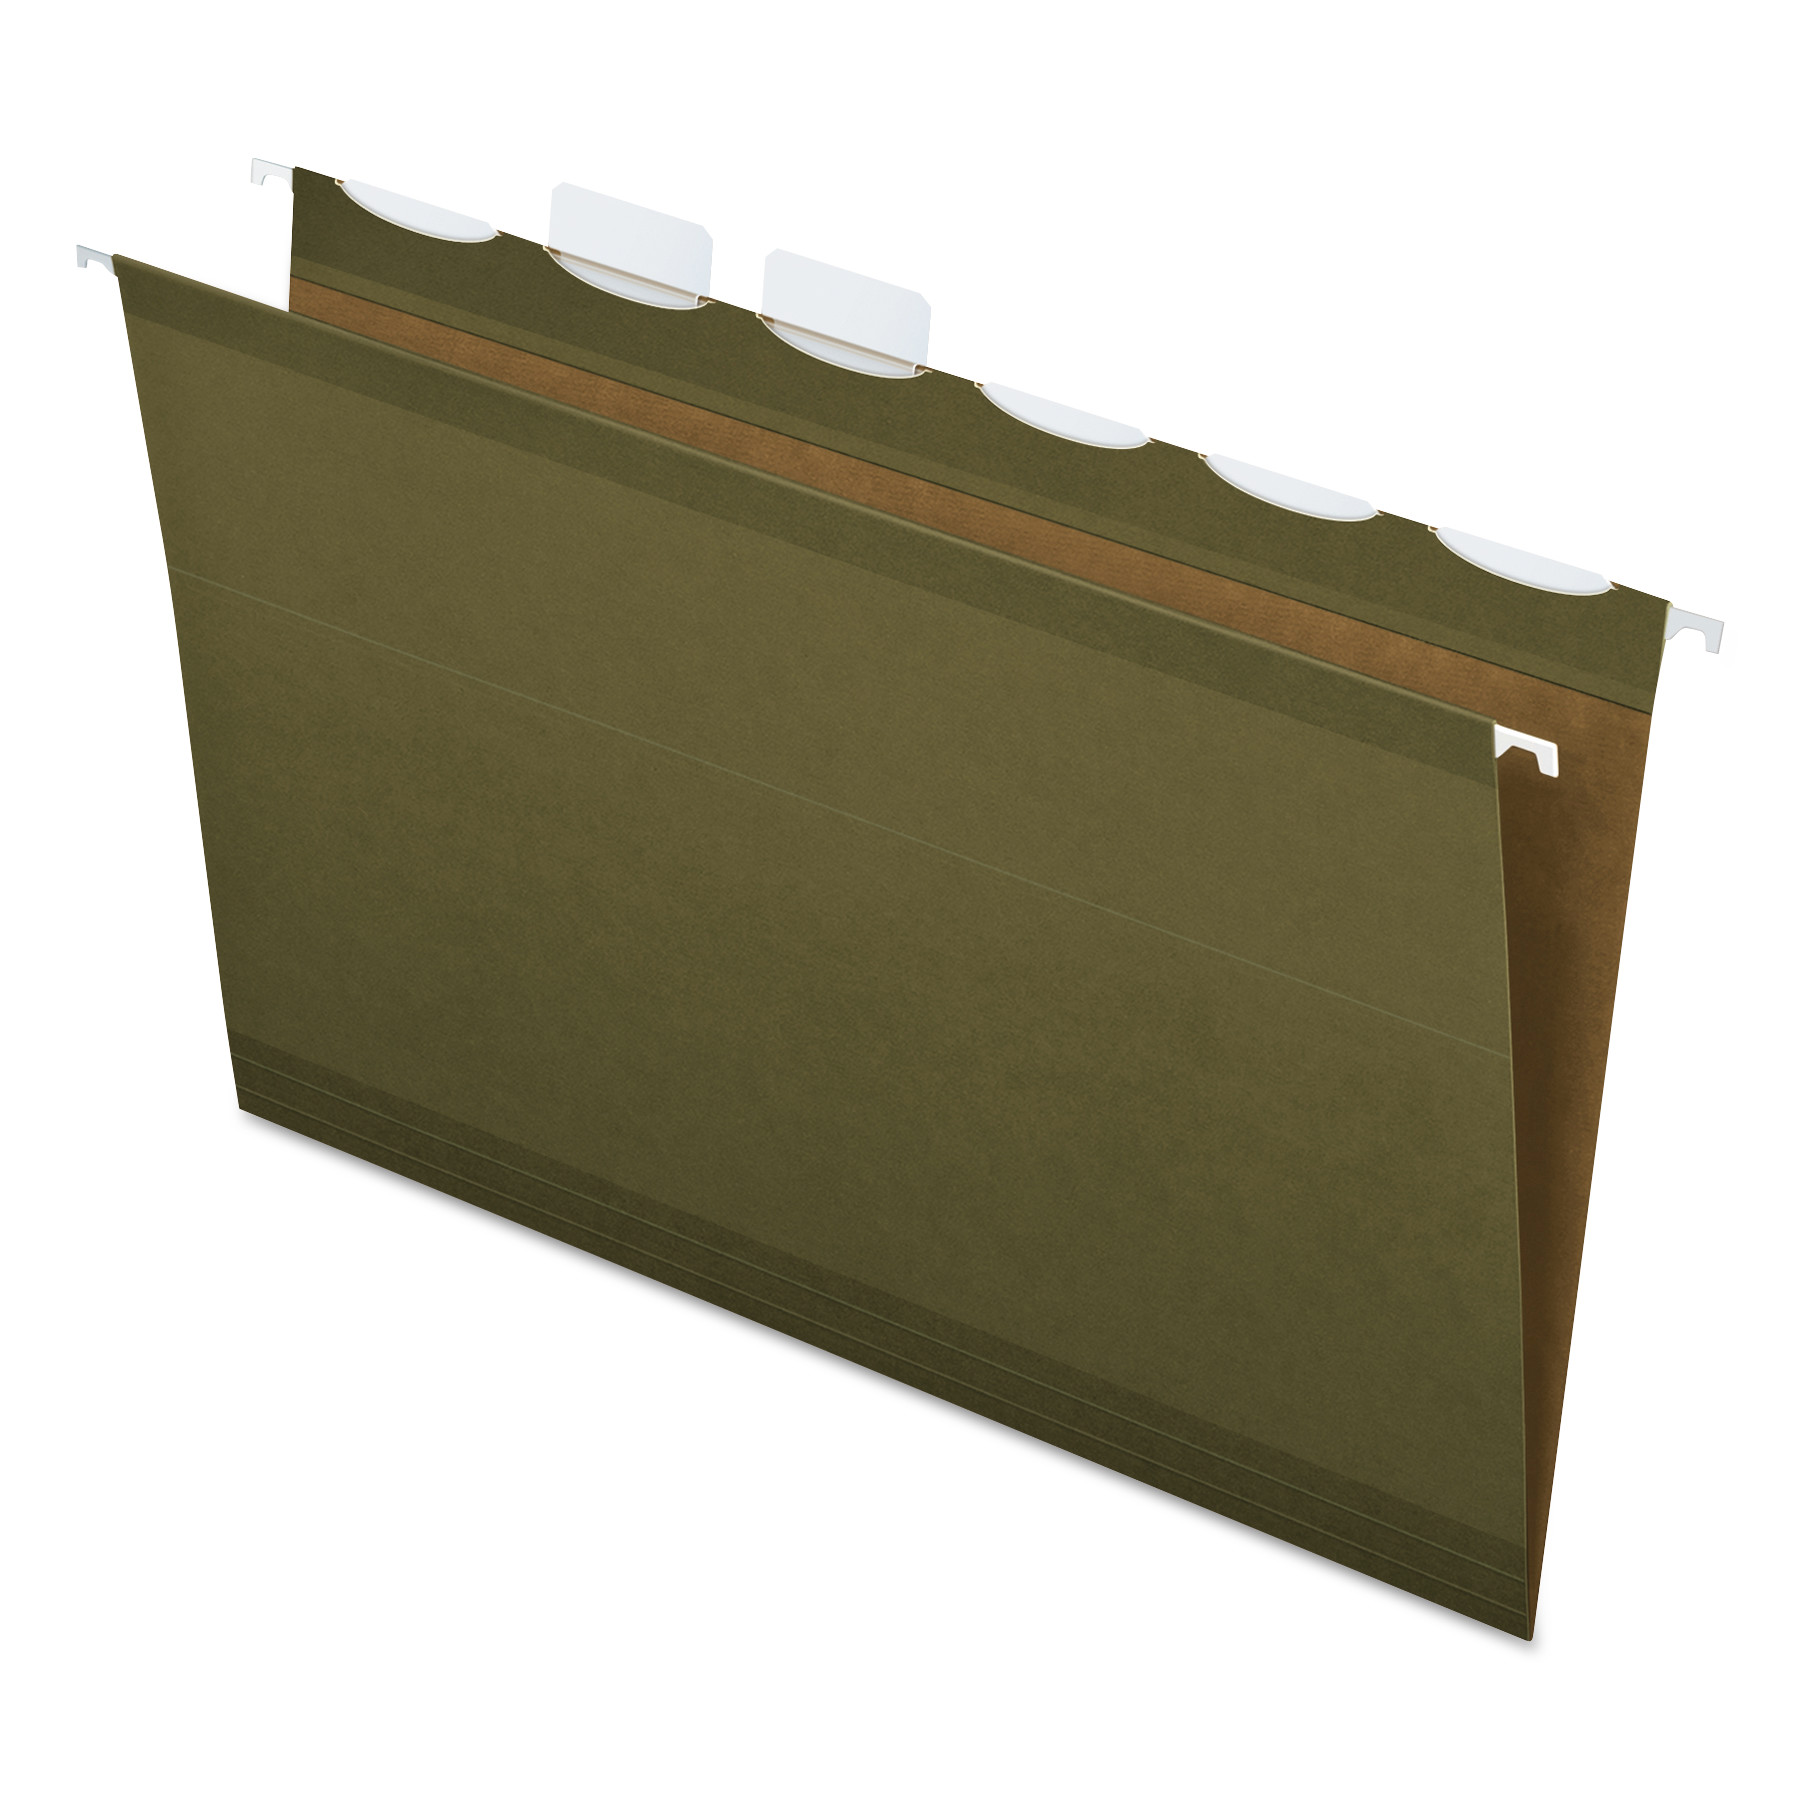  Pendaflex 42701EE Ready-Tab Extra Capacity Reinforced Colored Hanging Folders, Letter Size, 1/5-Cut Tab, Standard Green, 20/Box (PFX42701) 